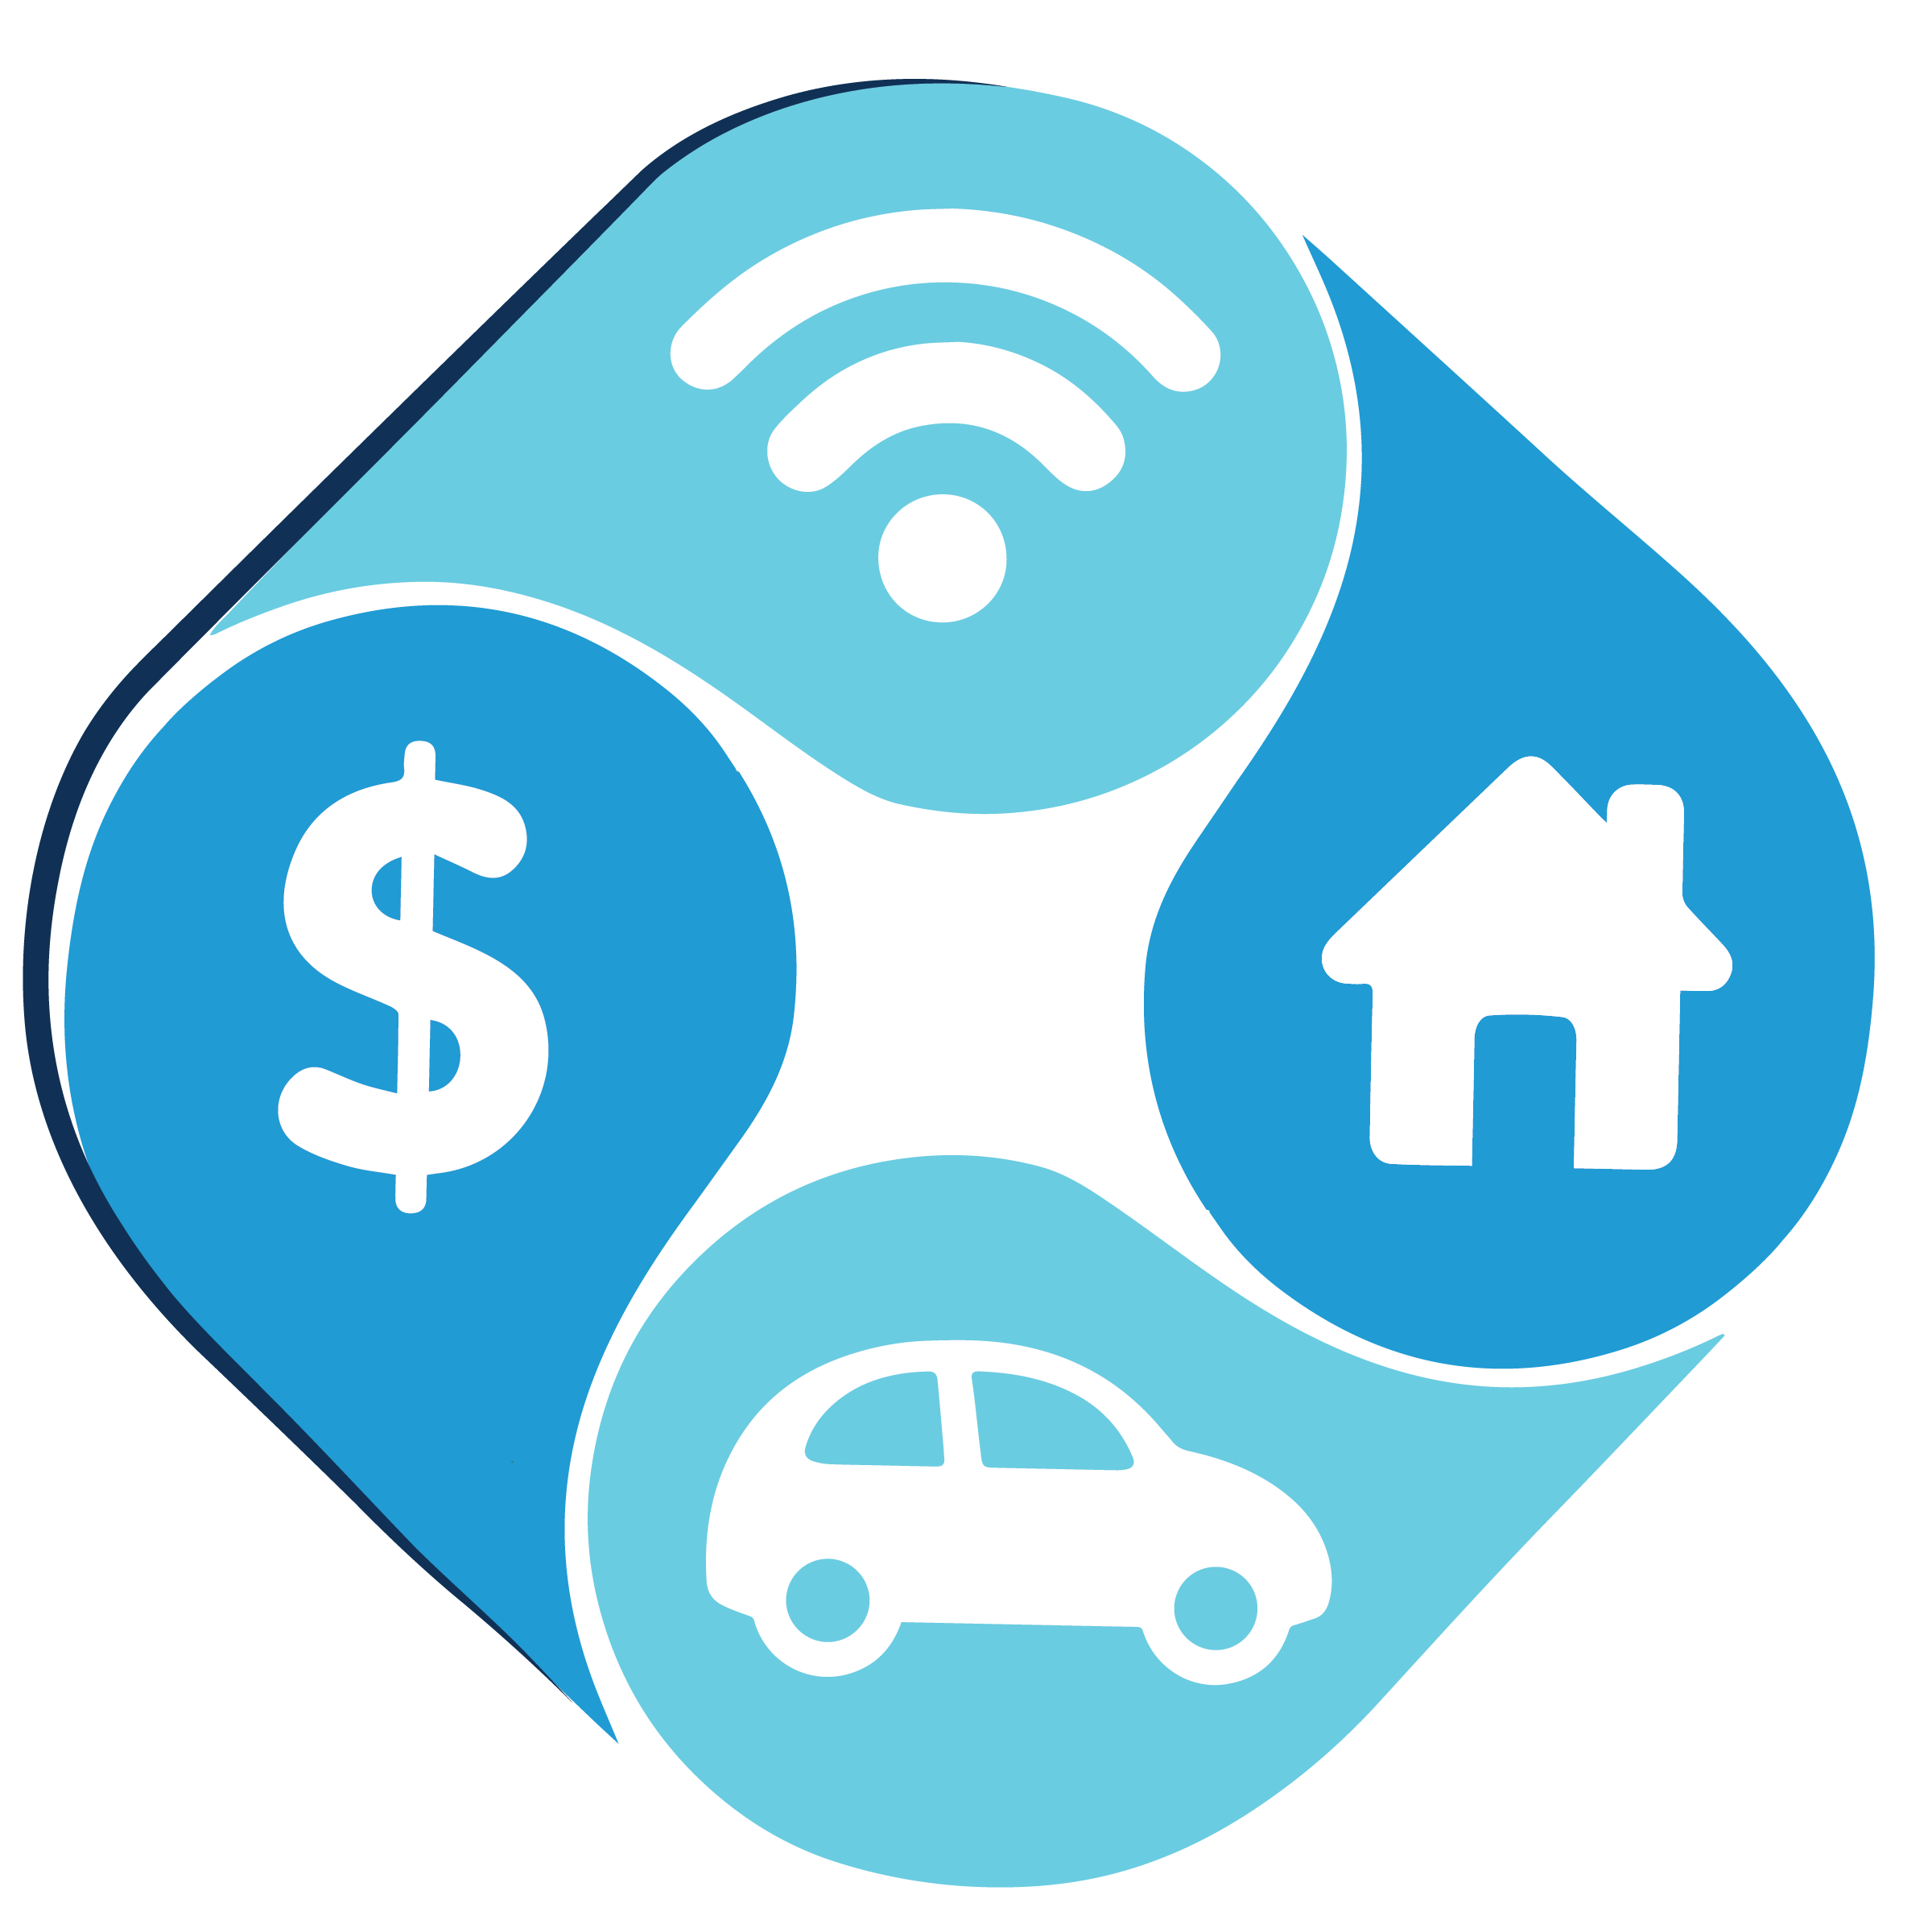 icon of wifi symbol, house, car, and american dollar sign